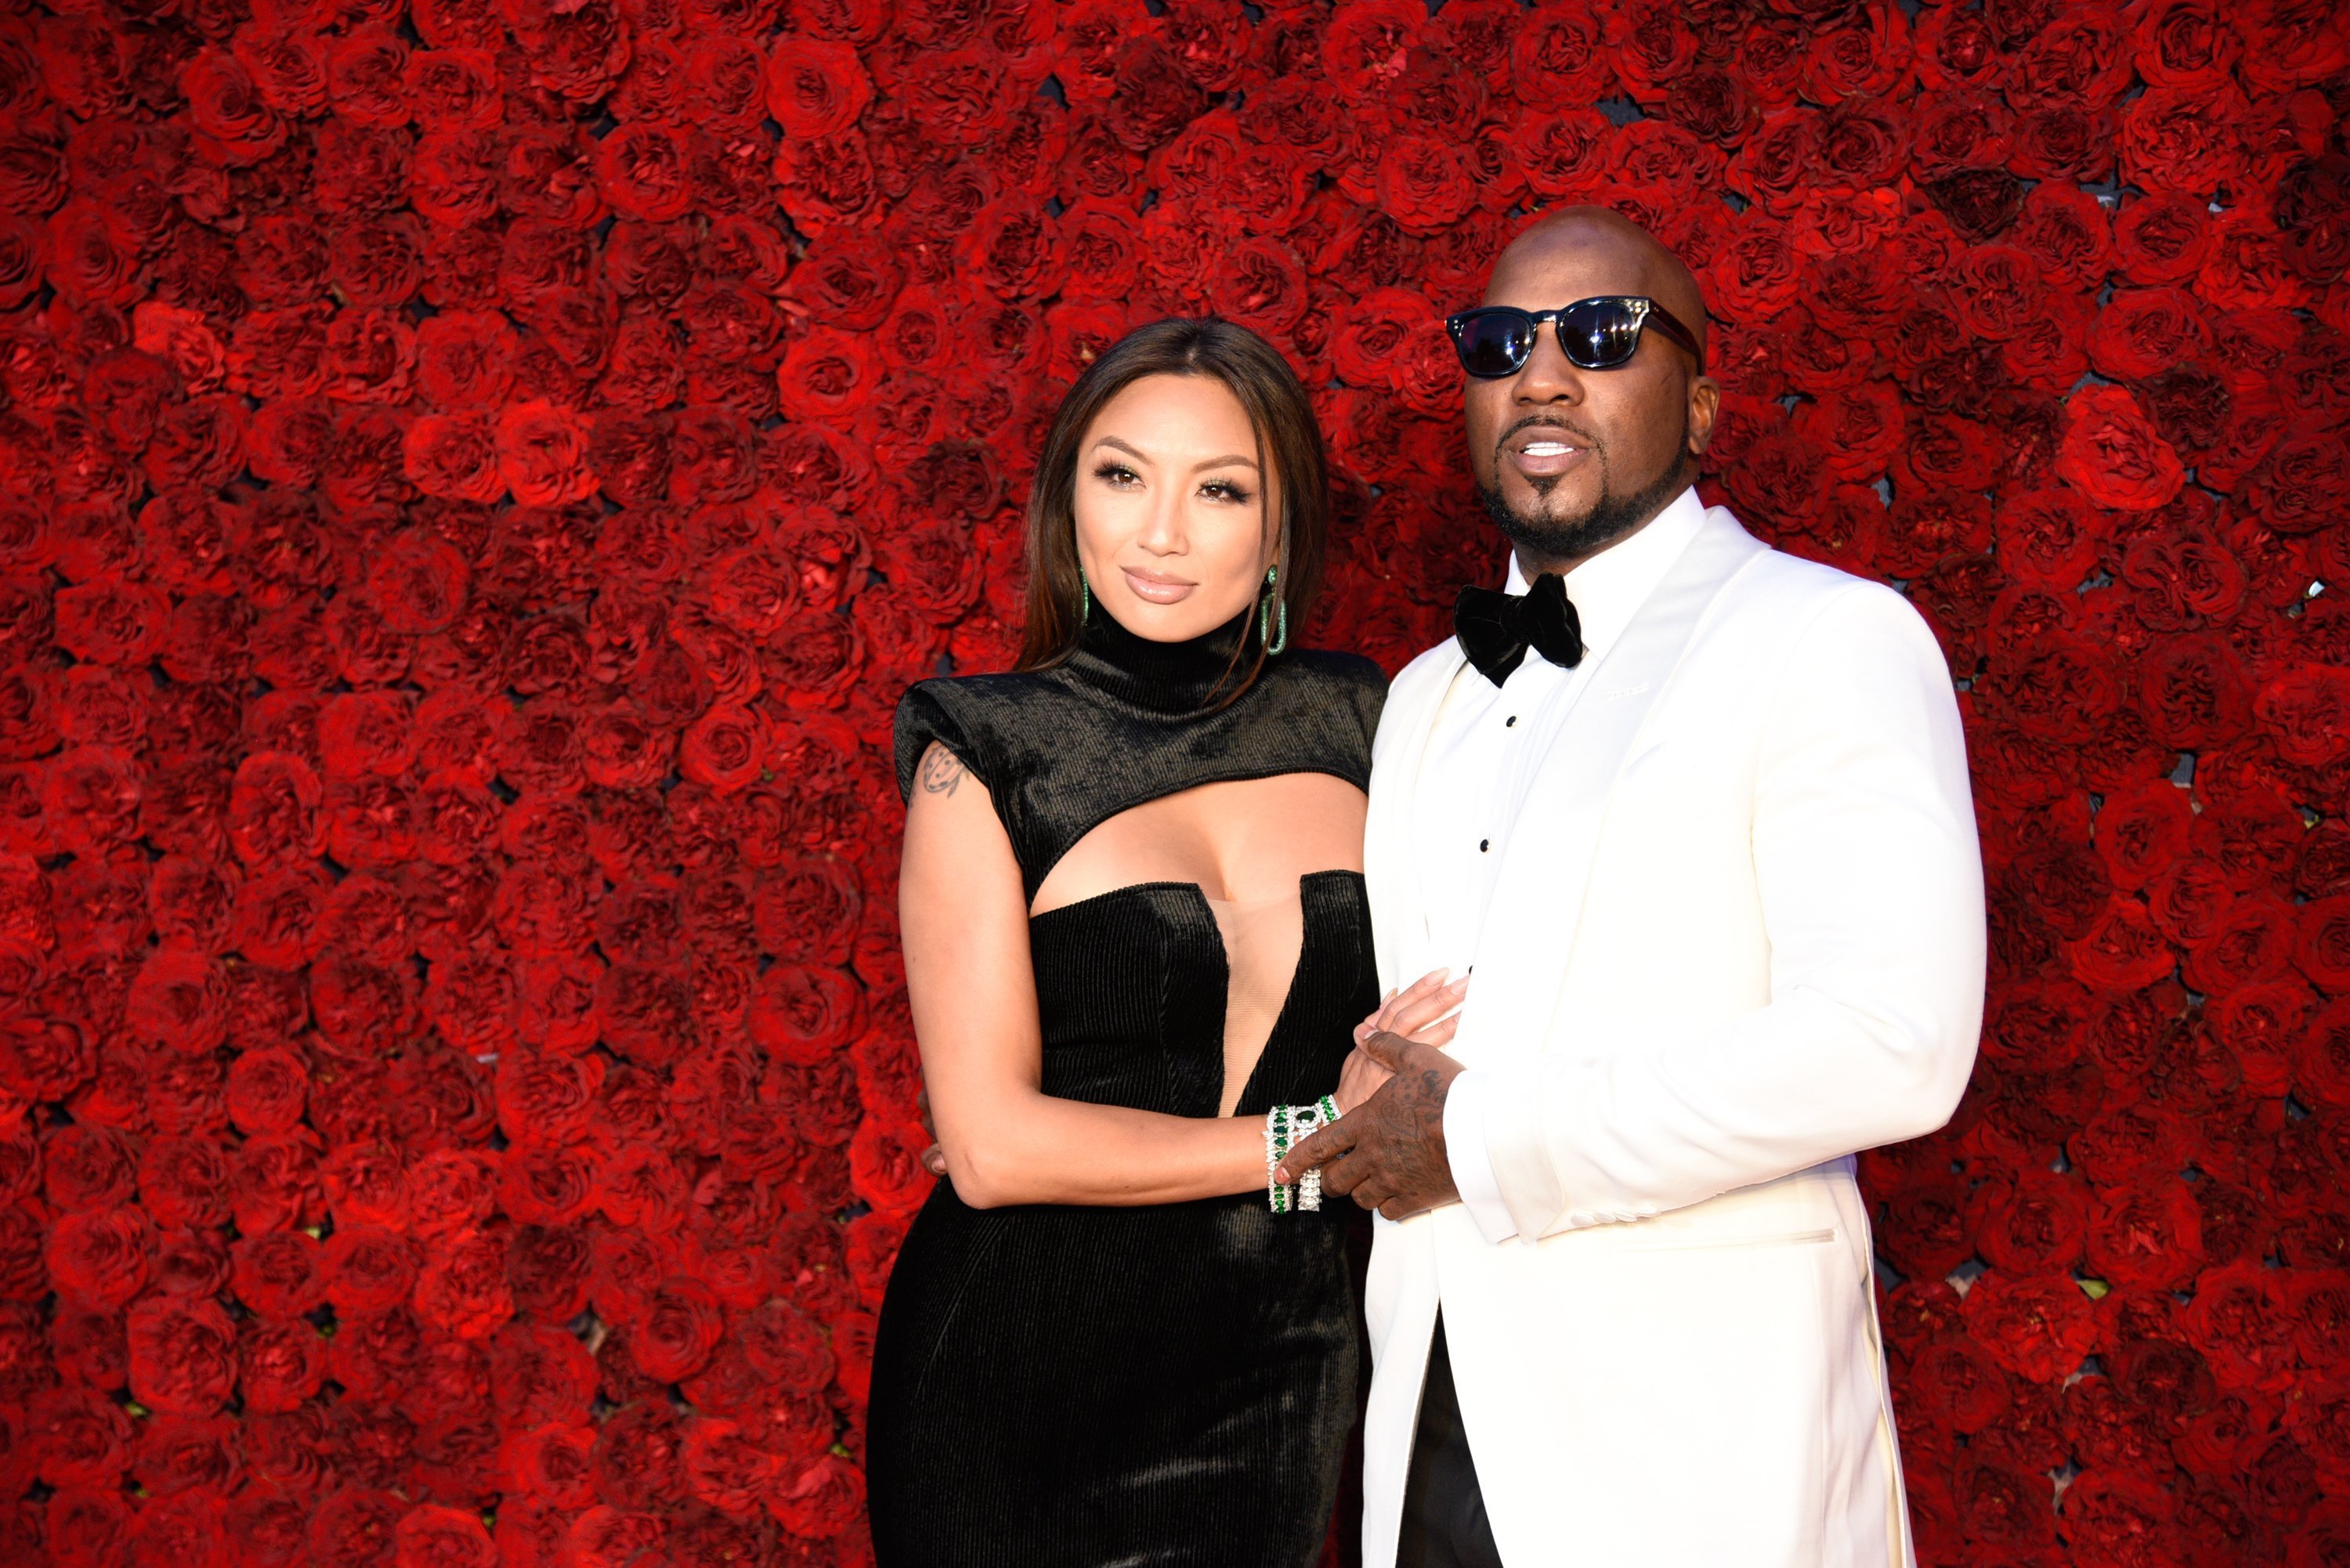 Jeannie Mai and Jeezy attend Tyler Perry Studios grand opening gala at Tyler Perry Studios| Photos: Getty Images